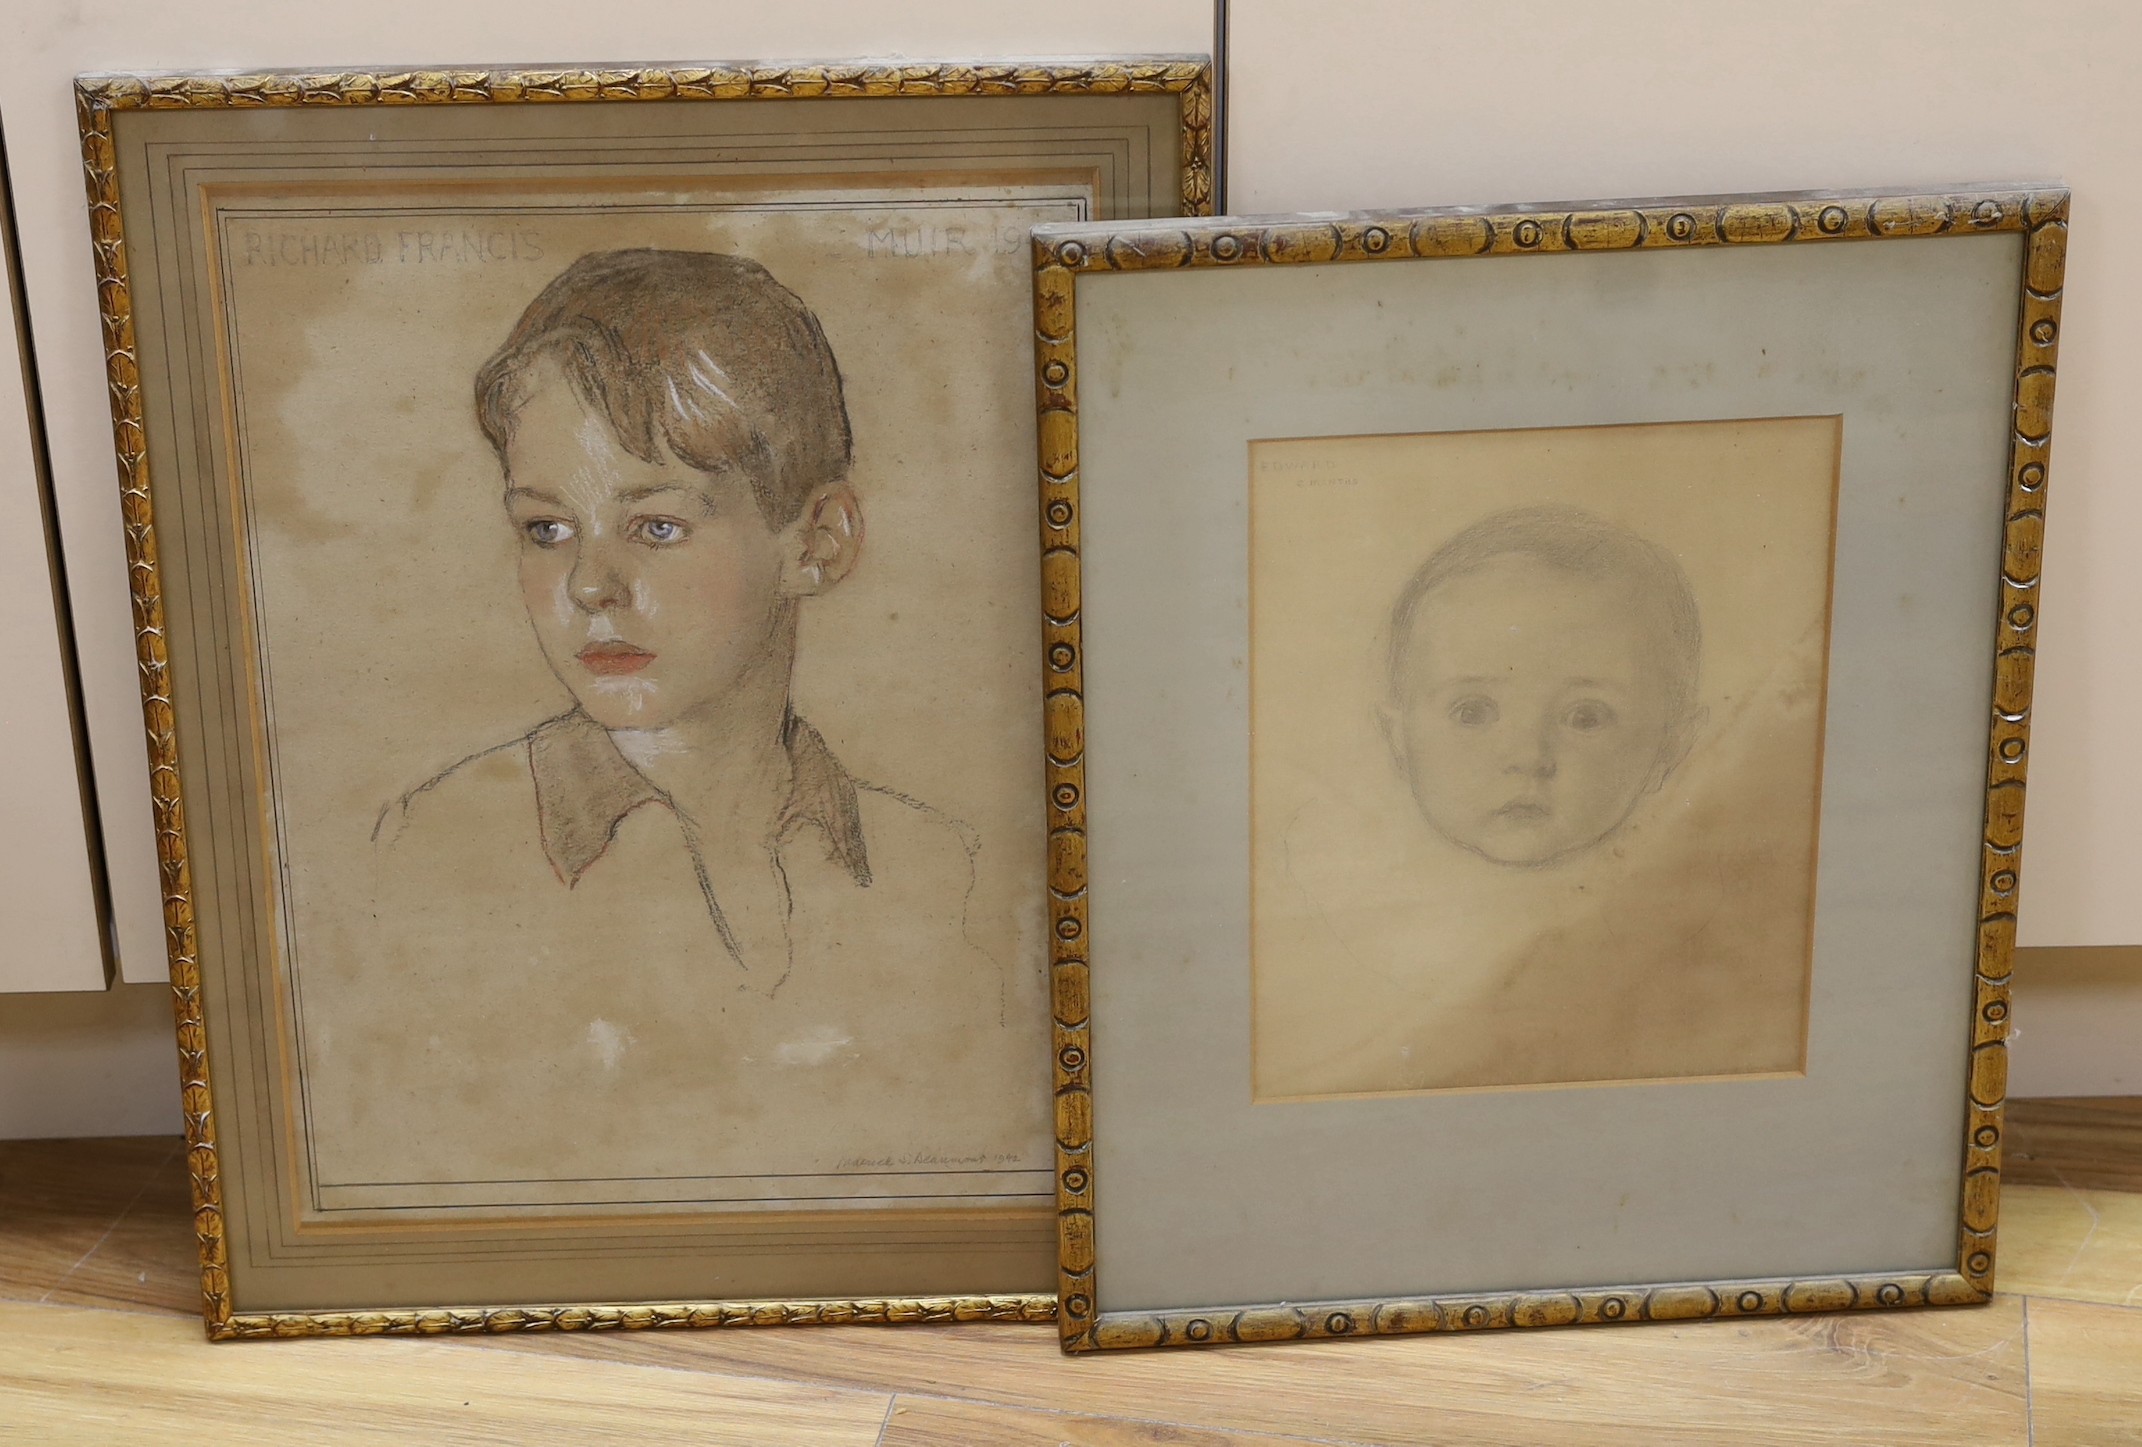 Frederick Samuel Beaumont (1861-1954), pastel and pencil sketches, two head study portraits, ‘Edward - 6 months’ and ‘Richard Francis - Muir 1945’, both signed and inscribed, largest 46 x 35cm